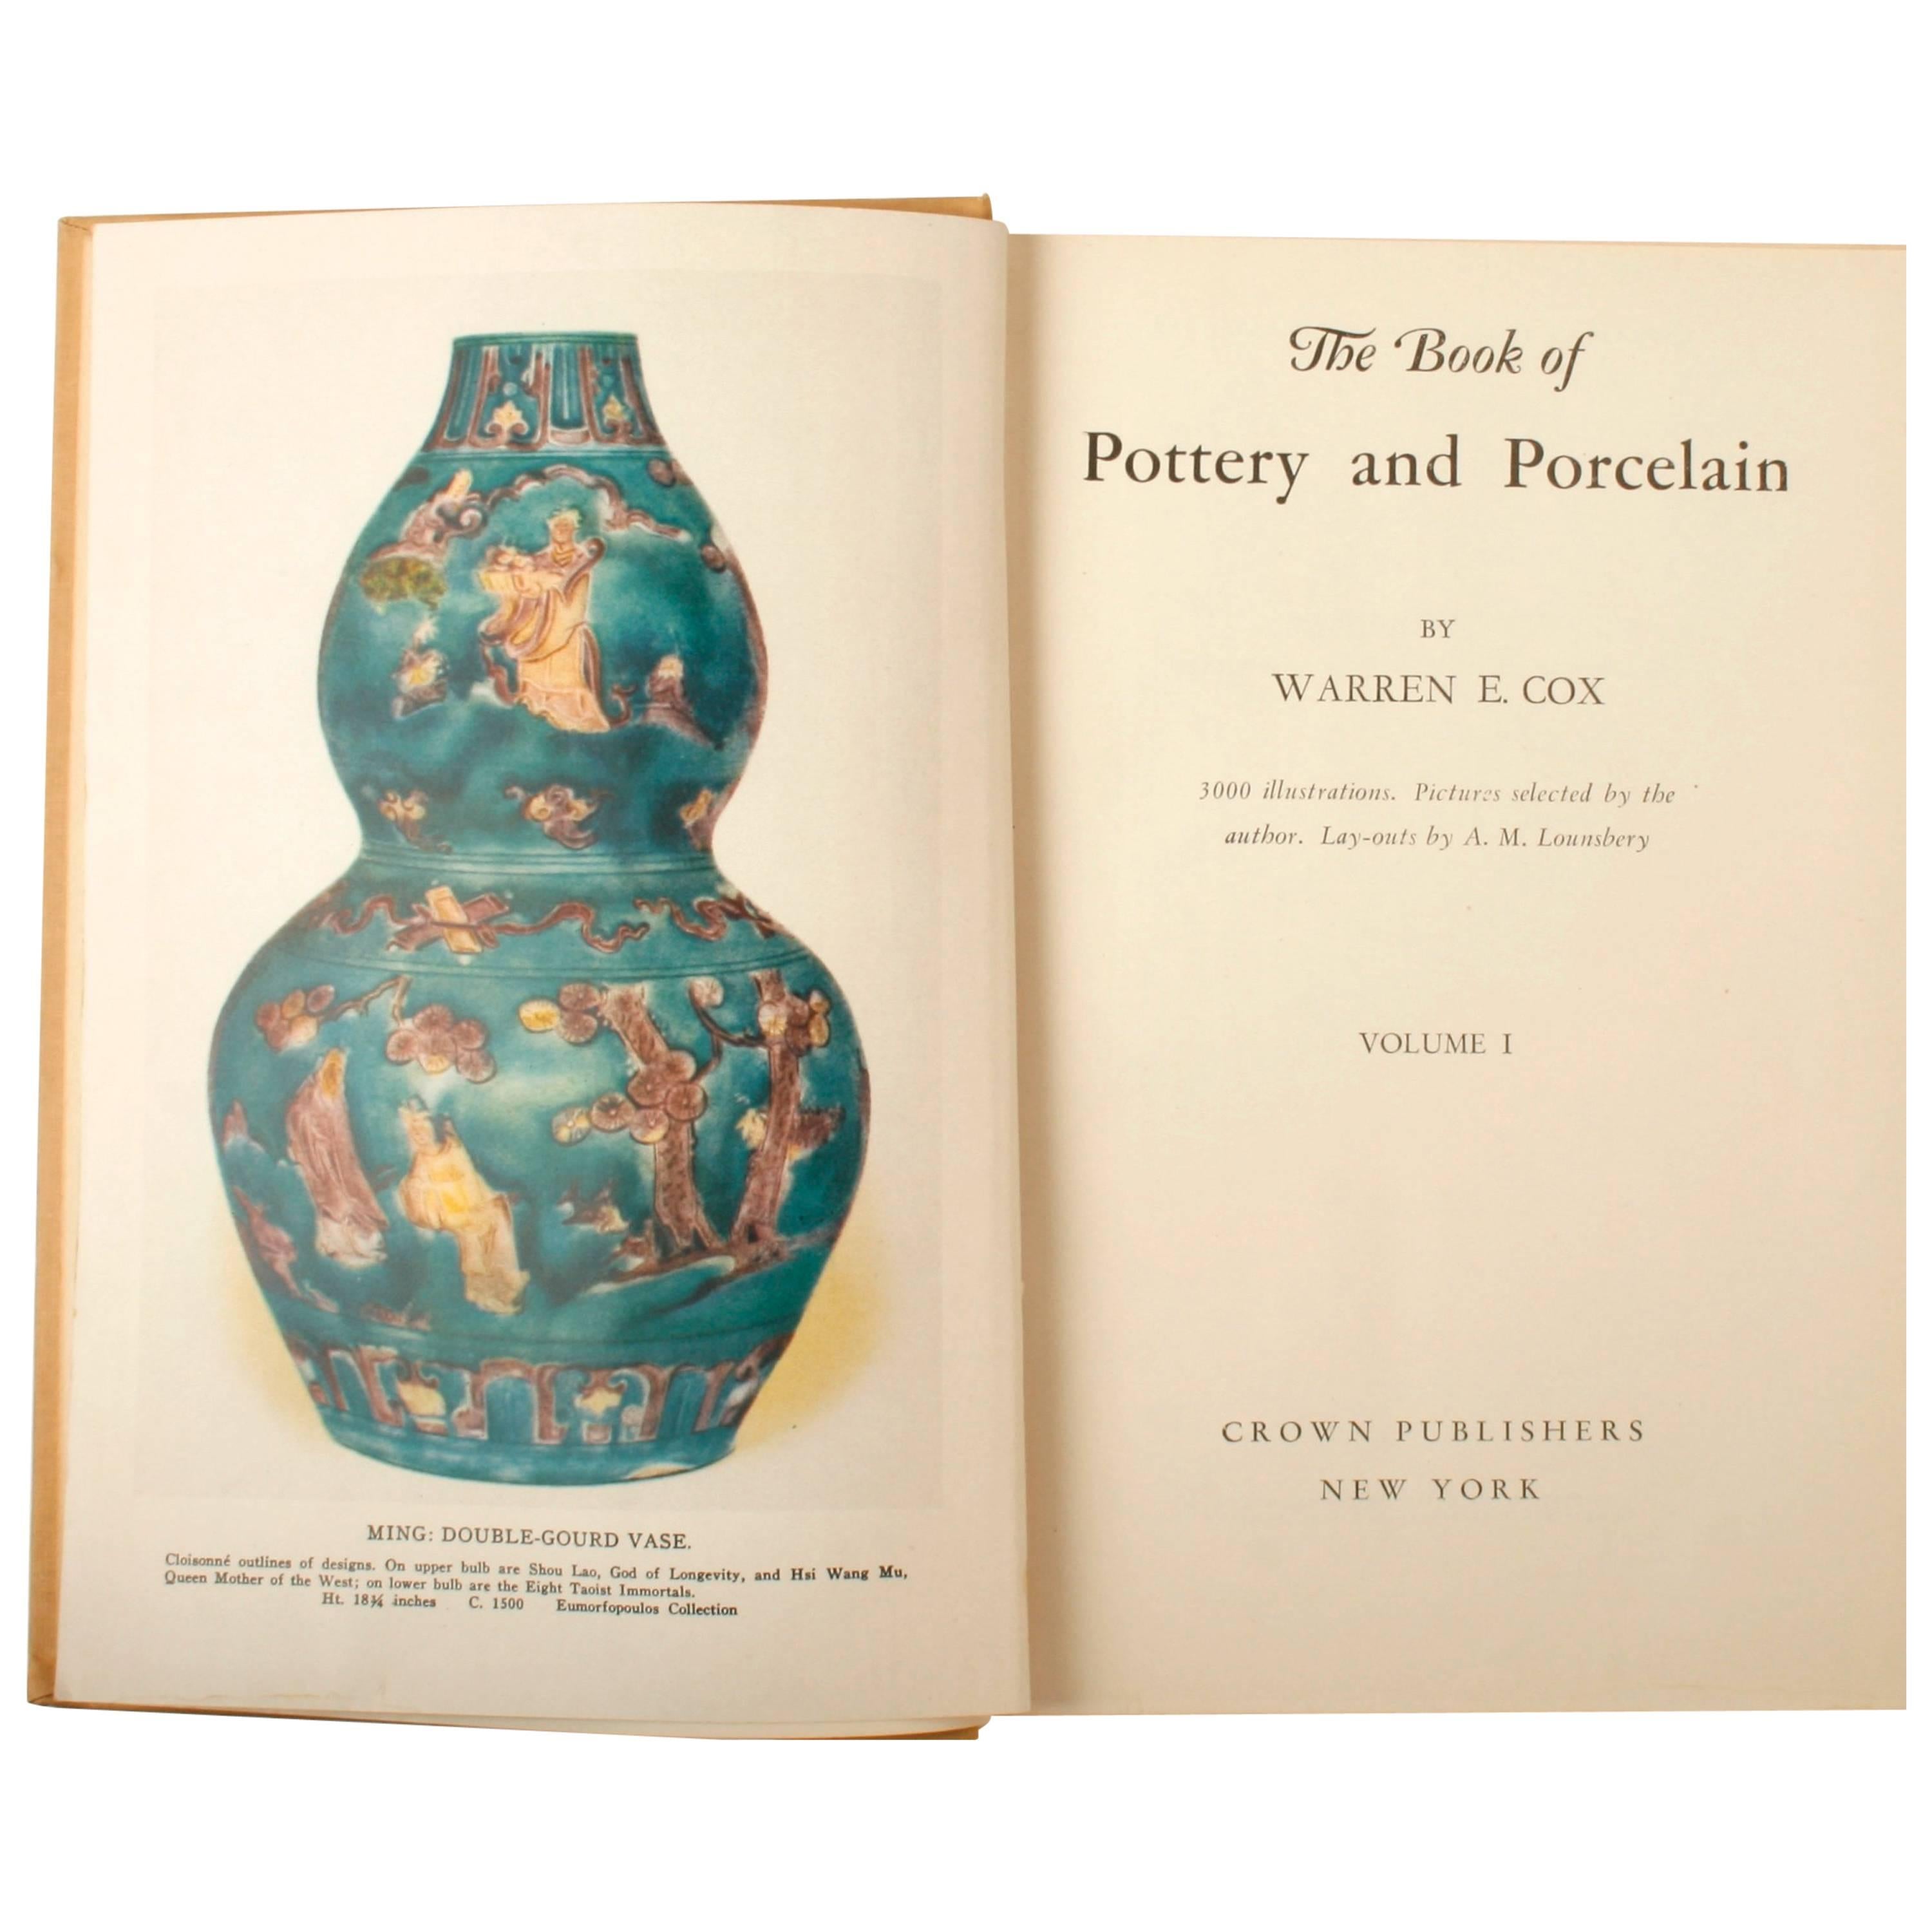 The Book of Pottery and Porcelain in 2 volumes by Warren COX. NY: Crown Publishers, 1949. 7th Ed hardcovers no slip case. 1158 pages. With over 3000 illustrations and foldout map. One of the best books on pottery and porcelain with a scholary text